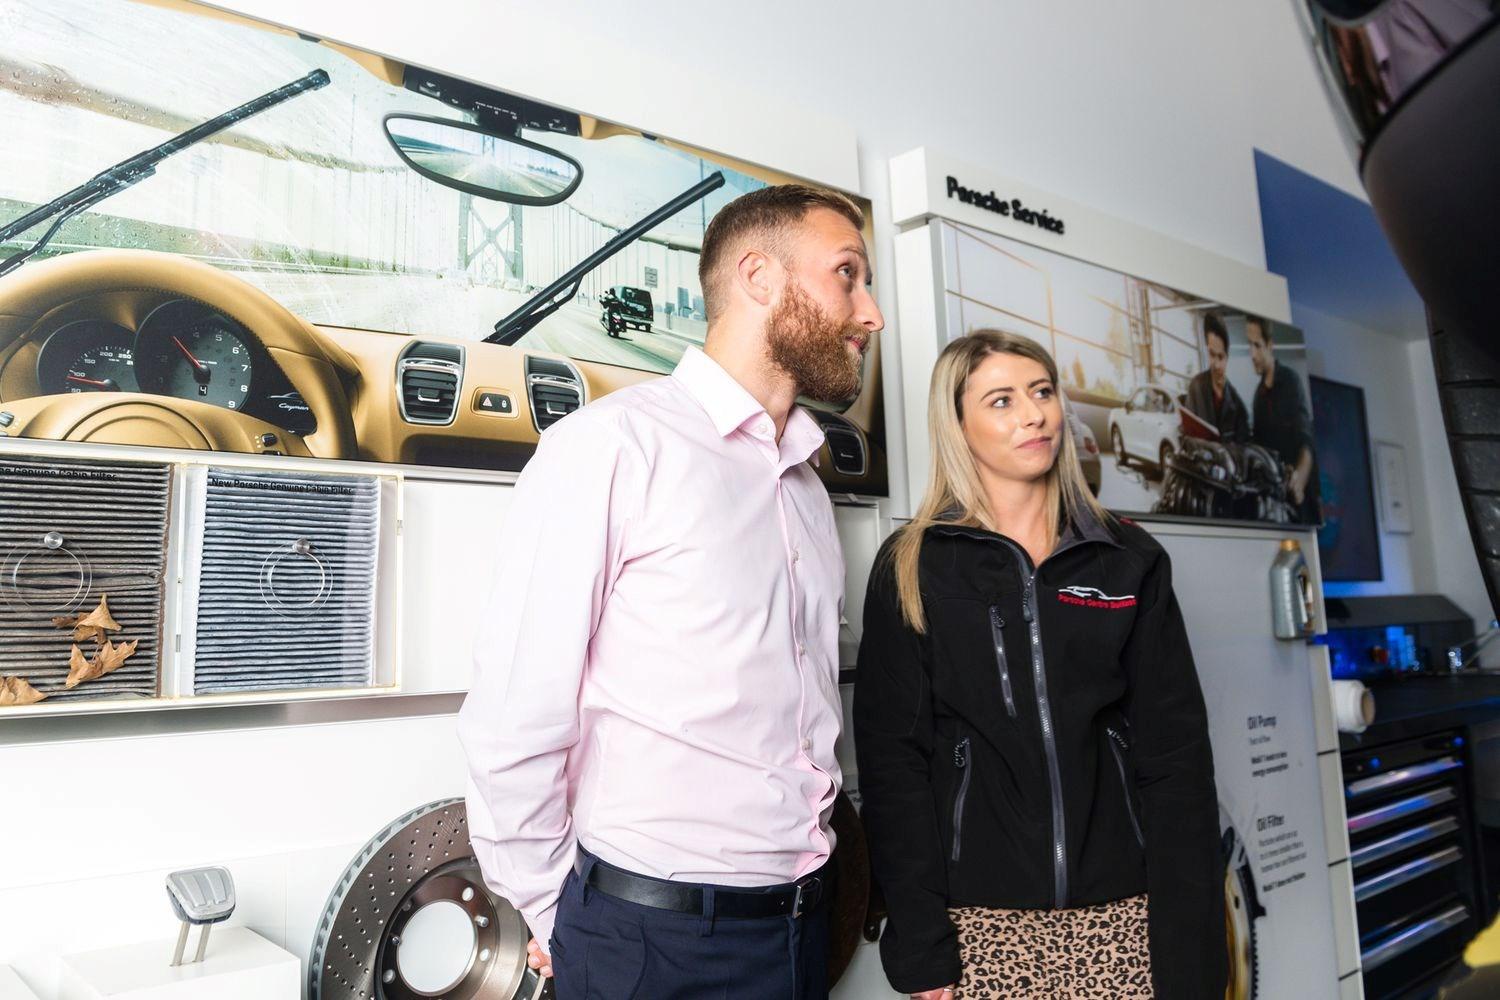 Porsche Centre Belfast Service Specialist talks to customer in the Porsche Centre Belfast showroom about the repairs that will be made to their Porsche.